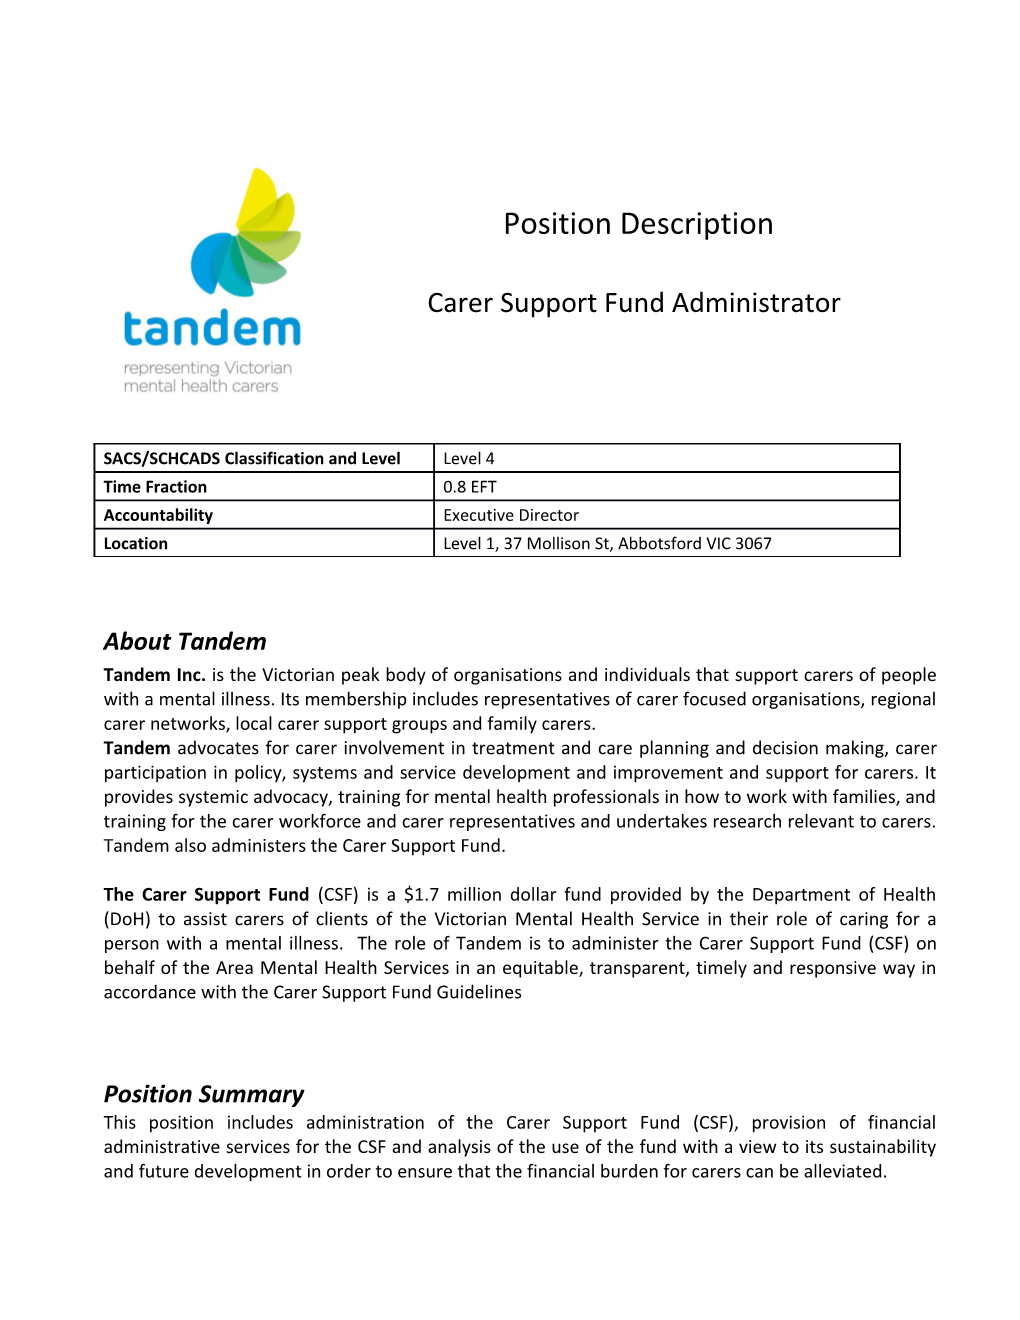 Tandem Inc. Is the Victorian Peak Body of Organisations and Individuals That Support Carers